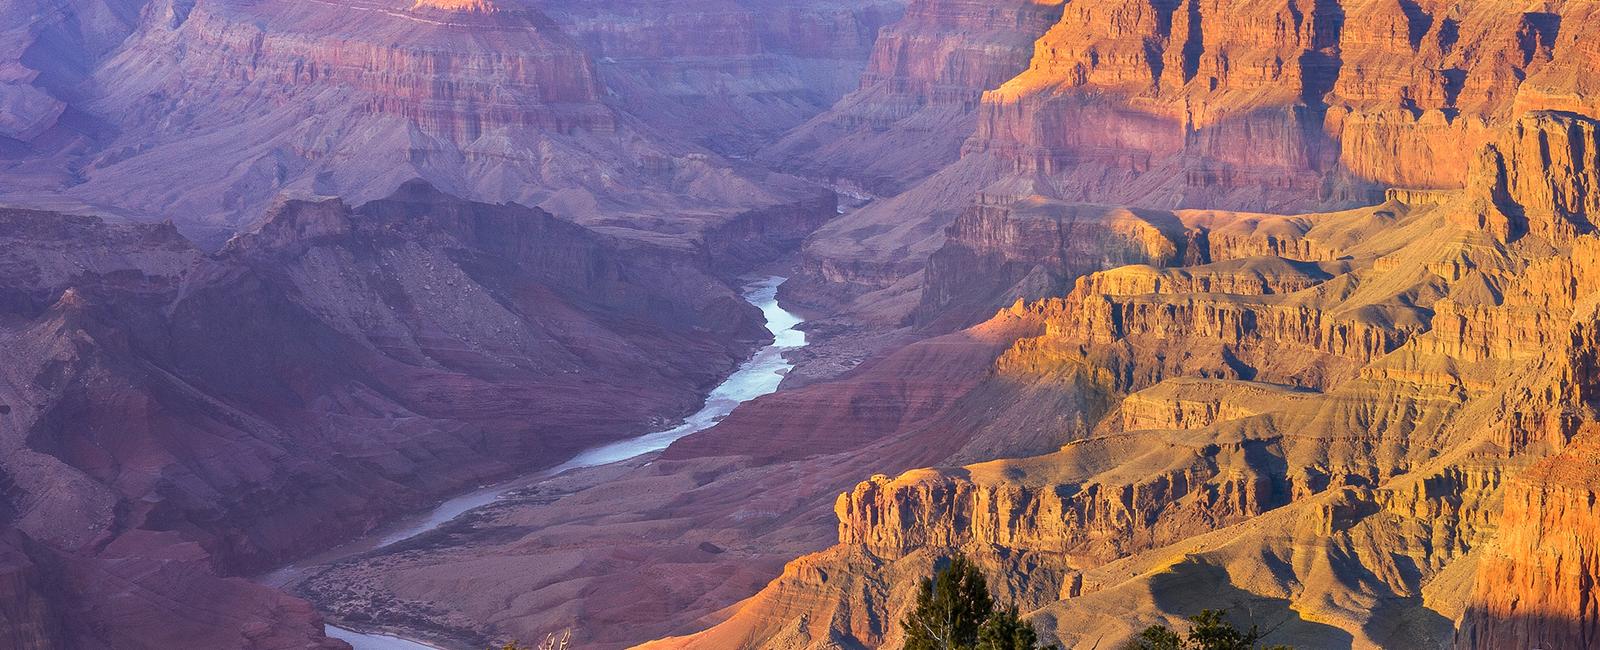 The grand canyon can hold around 900 trillion footballs